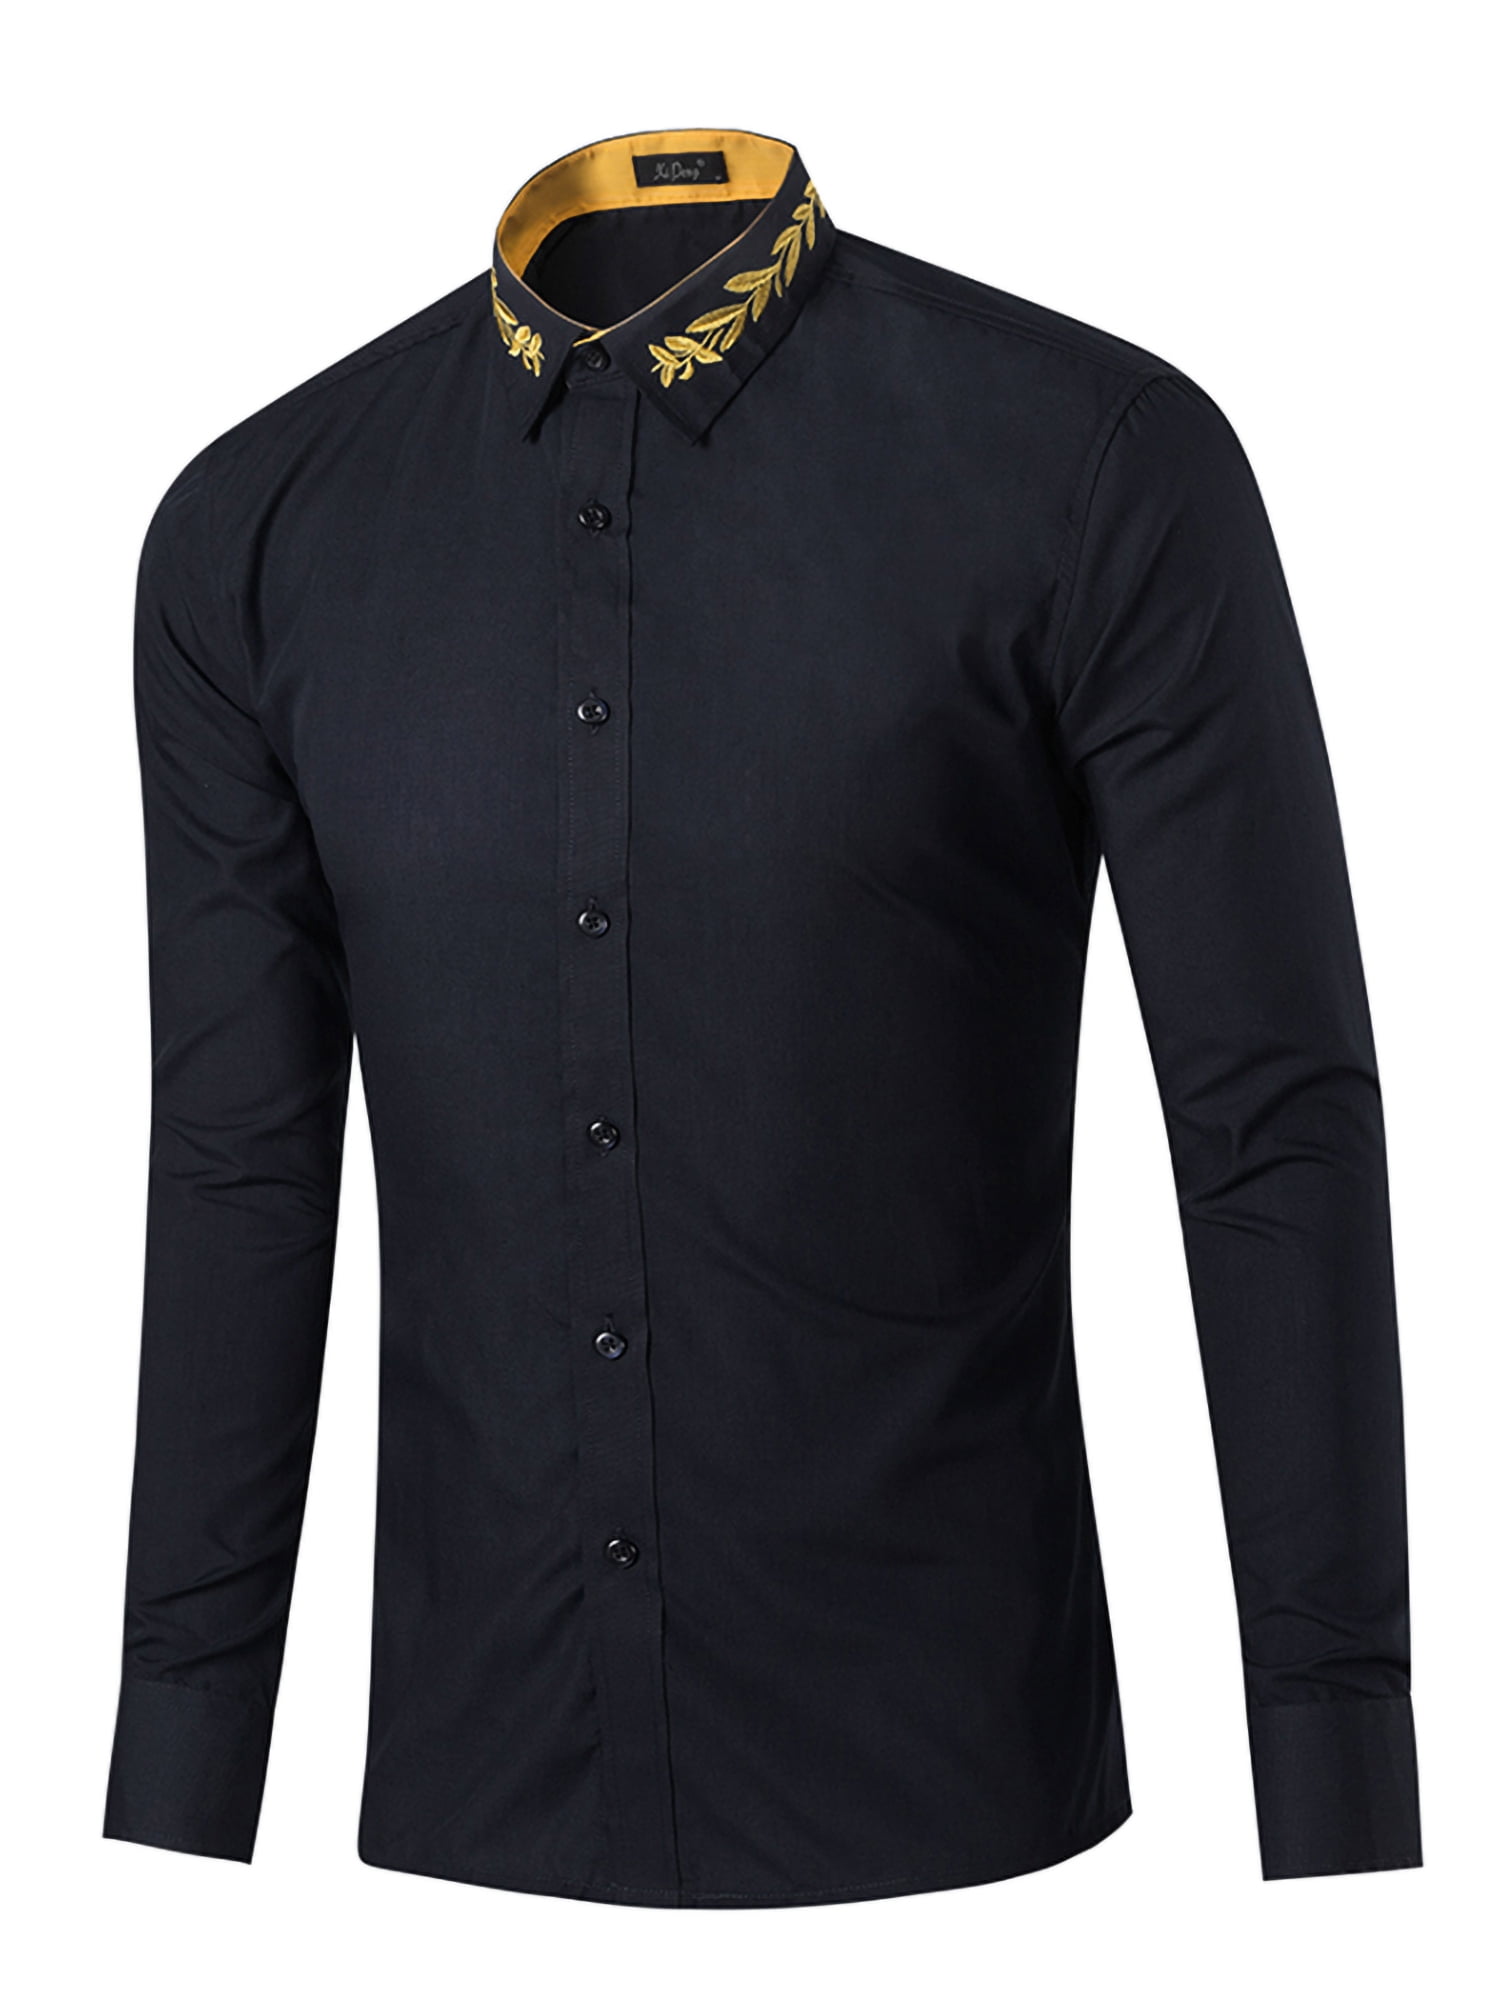 Men's New Fashion Long Sleeve Embroidery Slim Dress Shirt Youth Party Shirt Tops 